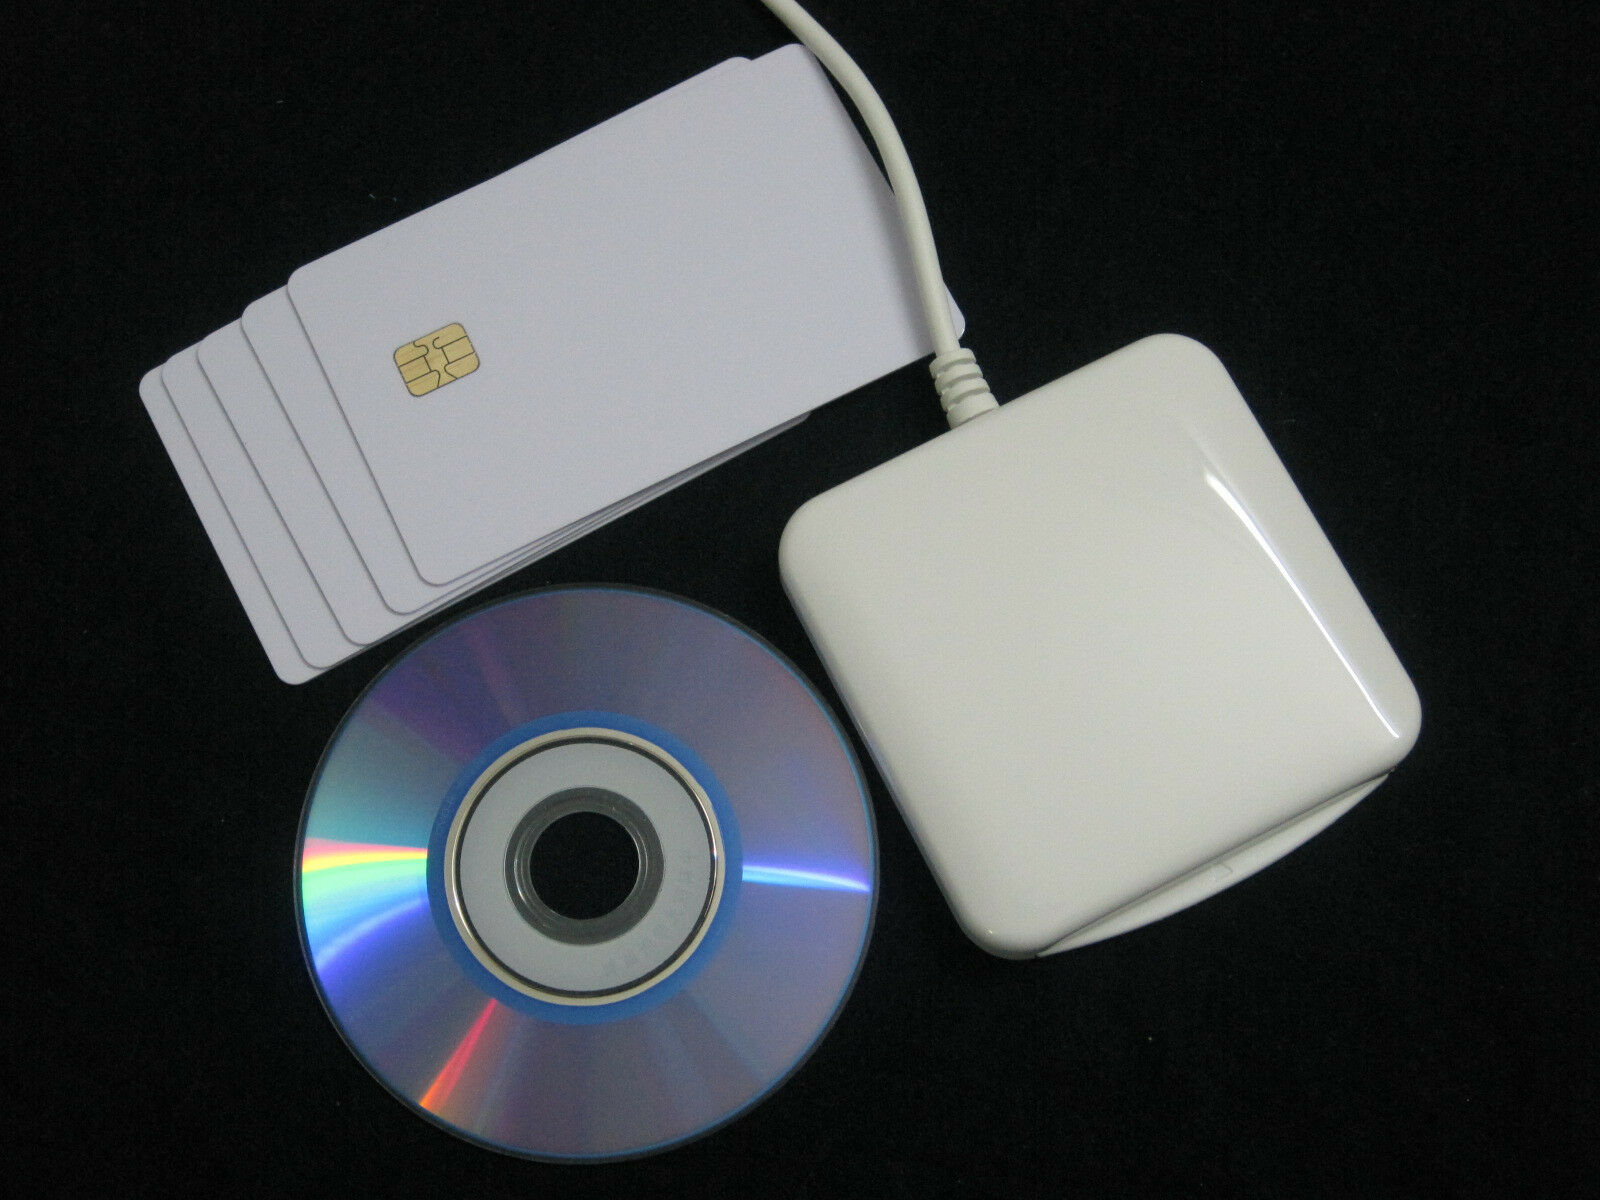 Acr38u-i1 Protable Contact Smart Ic Chip Card Reader Writer Support Mac&linux Os